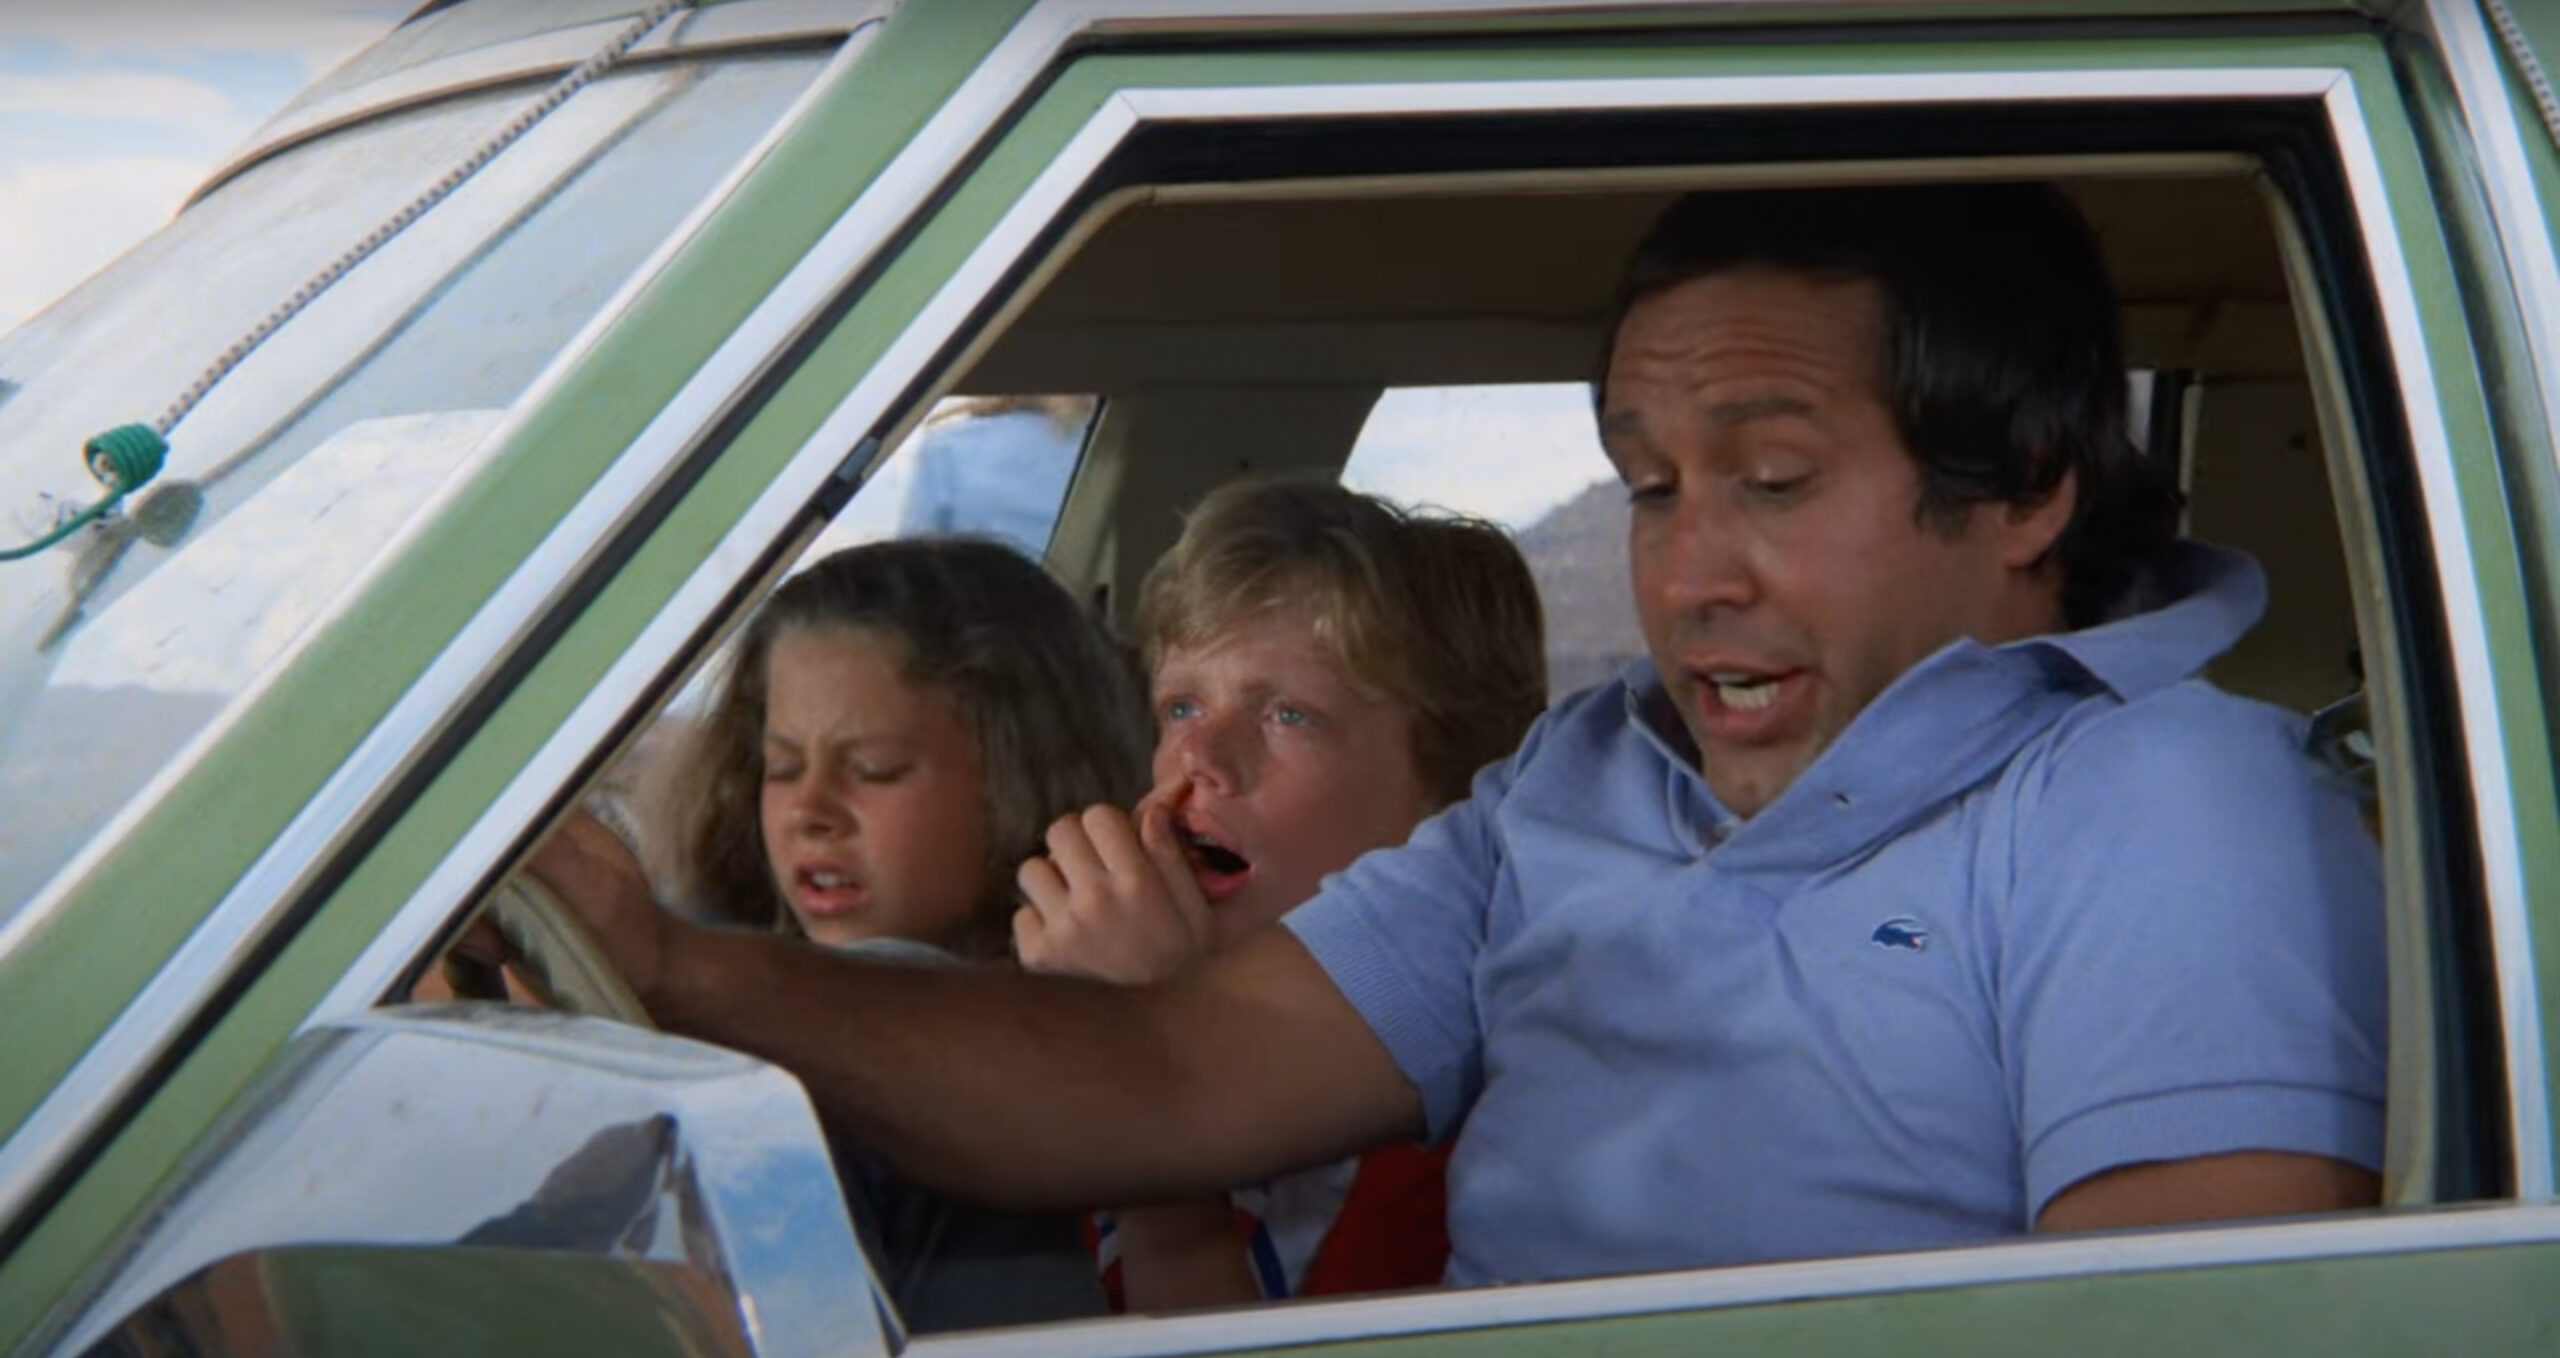 <p><a href="https://www.imdb.com/title/tt0085995/?ref_=nv_sr_srsg_2_tt_5_nm_3_in_0_q_Vaca"><em>National Lampoon’s Vacation</em></a> is one of the beloved American road trip movies that follows the Griswold family as they drive across the country to the Walley World theme park. </p>  <p>Launching an entire series of films, this iconic comedy captured viewers' hearts across the country. <em>National Lampoon’s Vacation </em>represents the epitome of family vacation and is known as one of the best road trip movies of all time. </p>  <p><strong>Read More: </strong><a href="https://www.snipdaily.com/best-80s-movies-and-where-to-stream-them/"><strong>8 Best 80s Movies and Where to Stream Them</strong></a> </p>